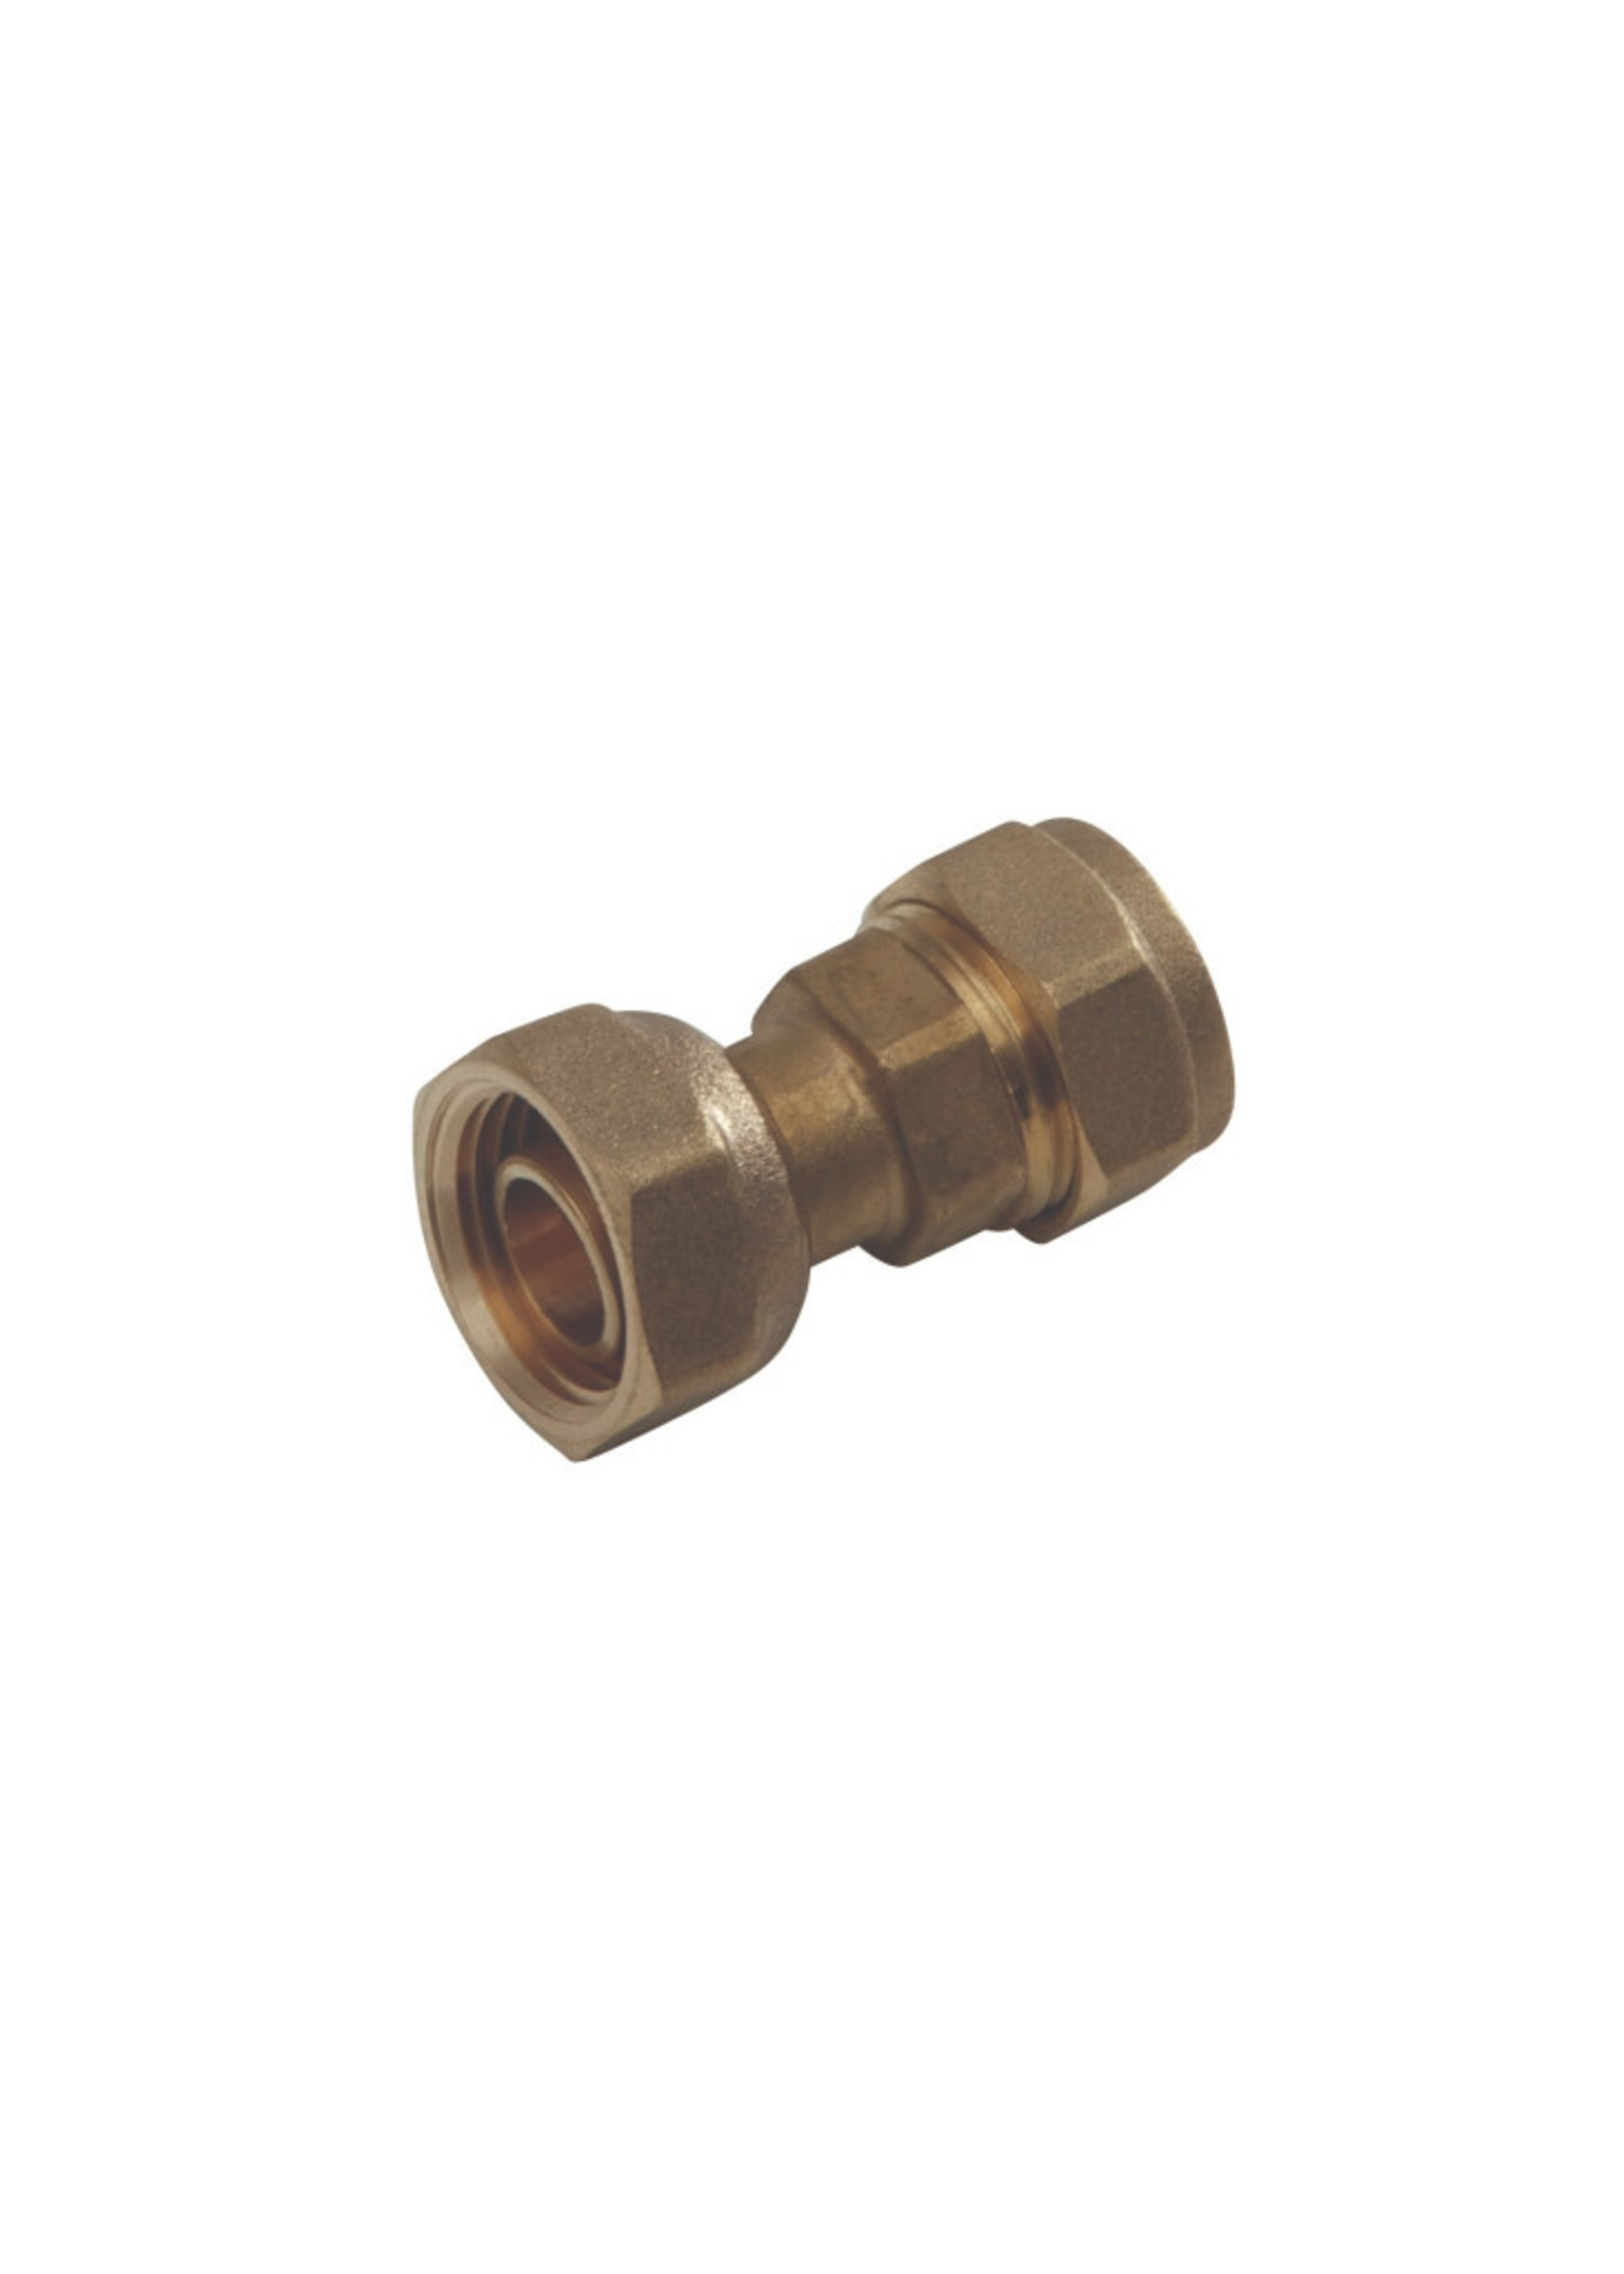 Securplumb Compression Straight Tap Connector 15mm x 3/4” Brass